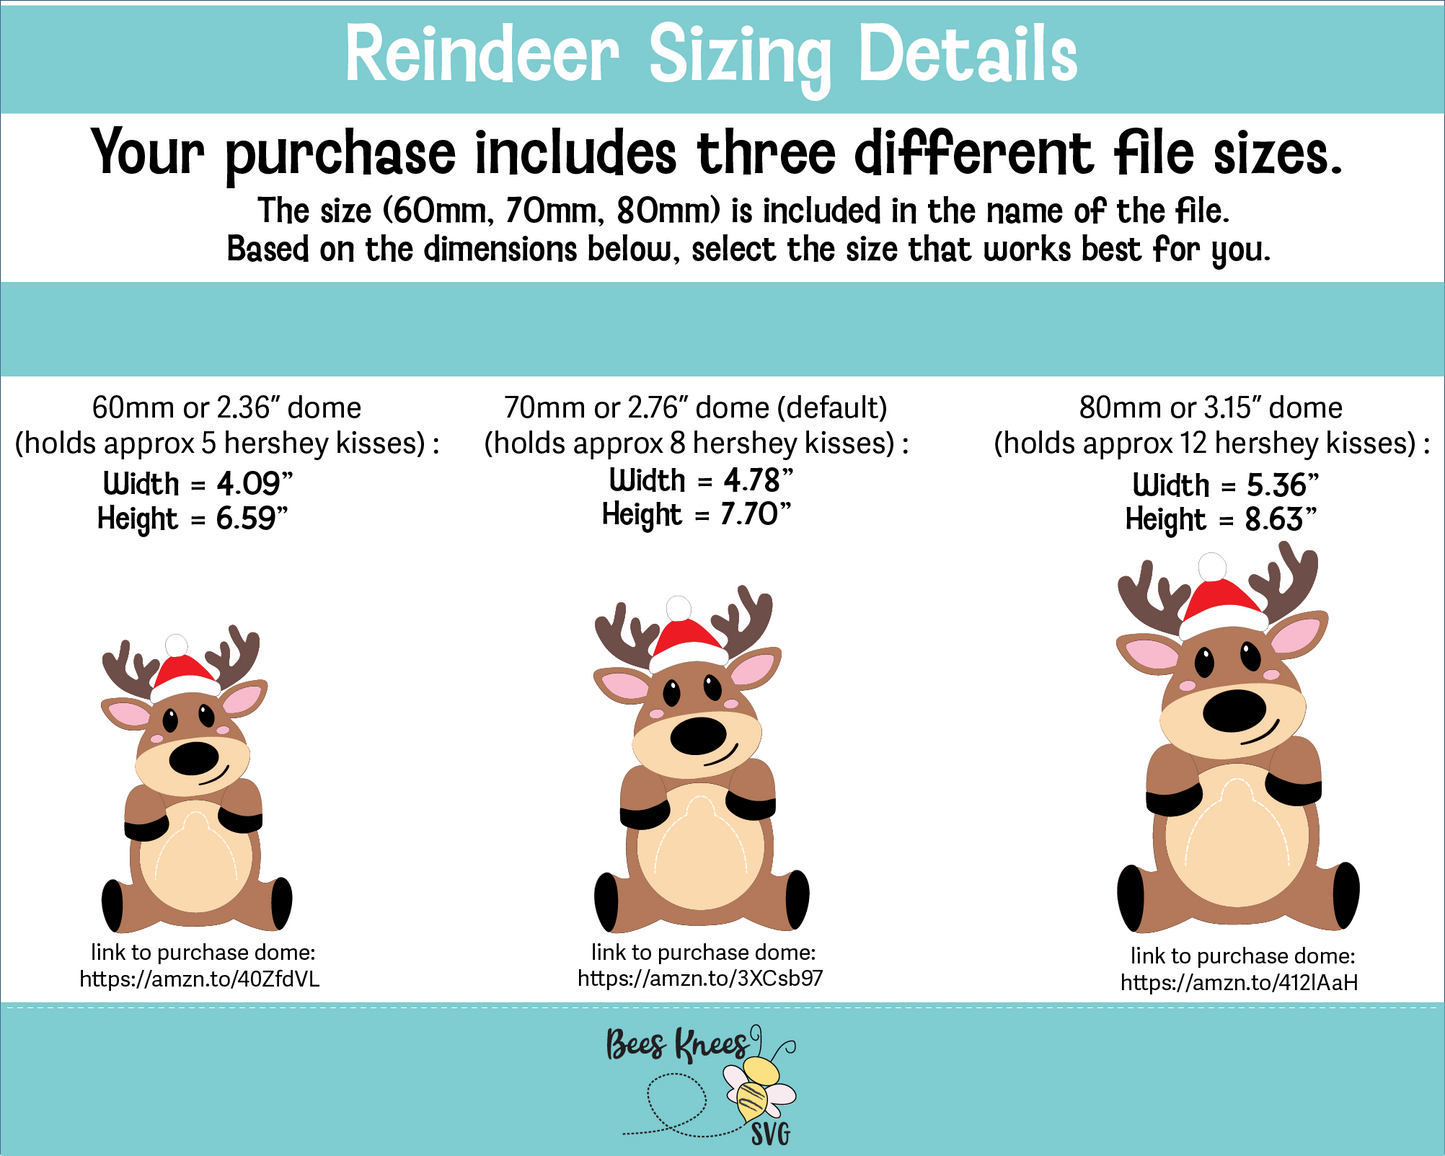 Cute Reindeer Dome Candy Holder SVG File